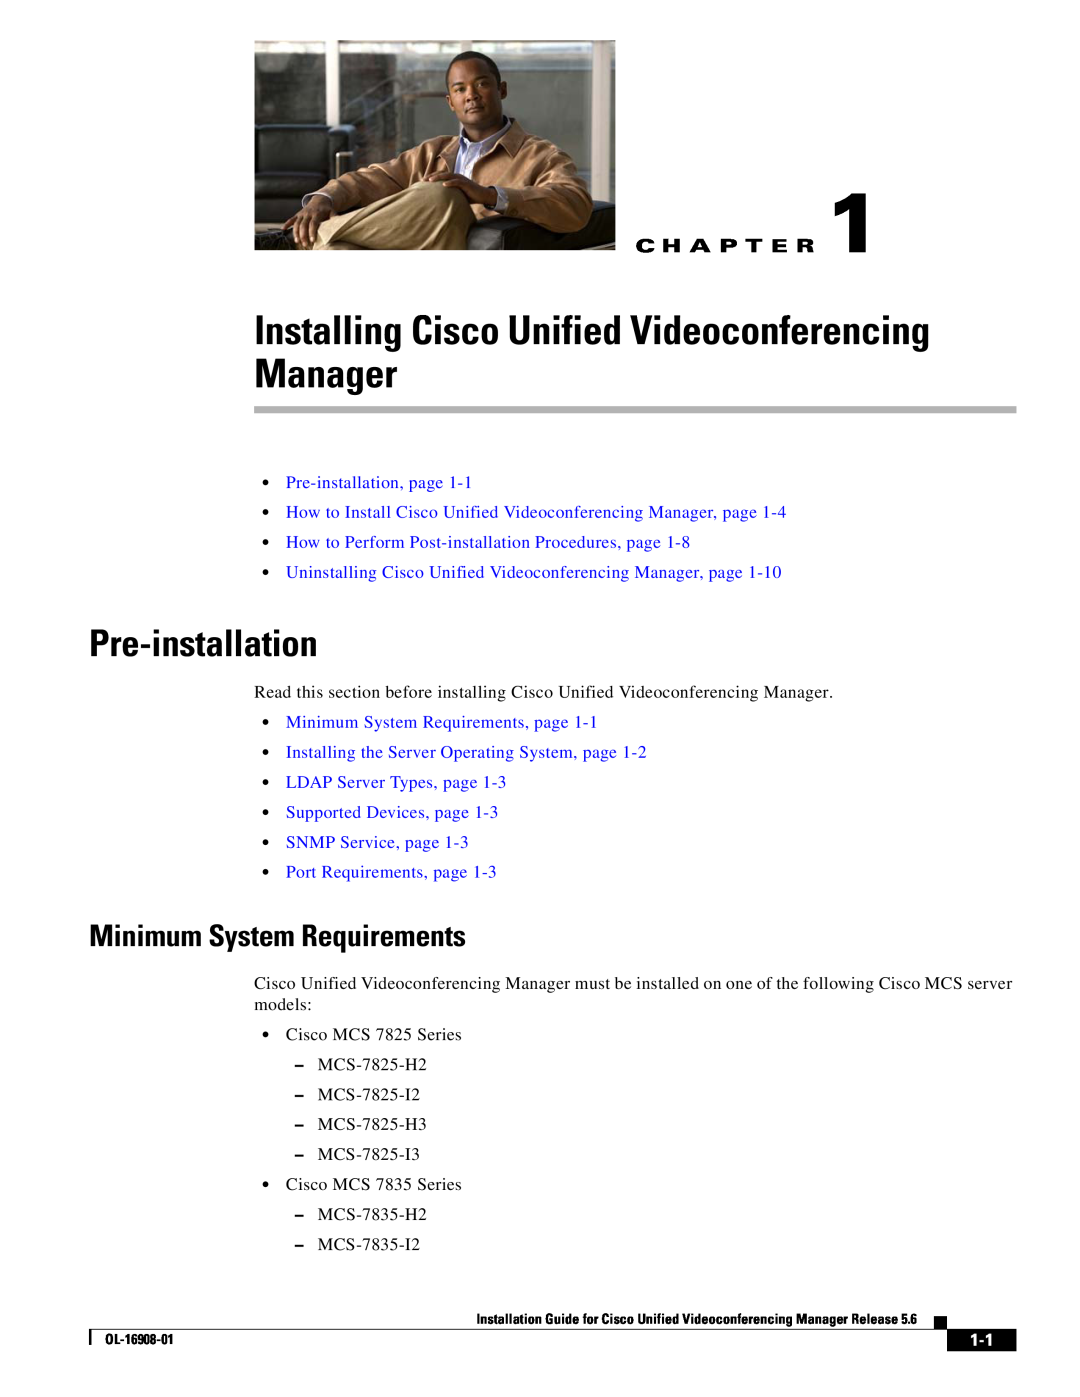 Cisco Systems manual Installing Cisco Unified Videoconferencing Manager, Pre-installation, Minimum System Requirements 